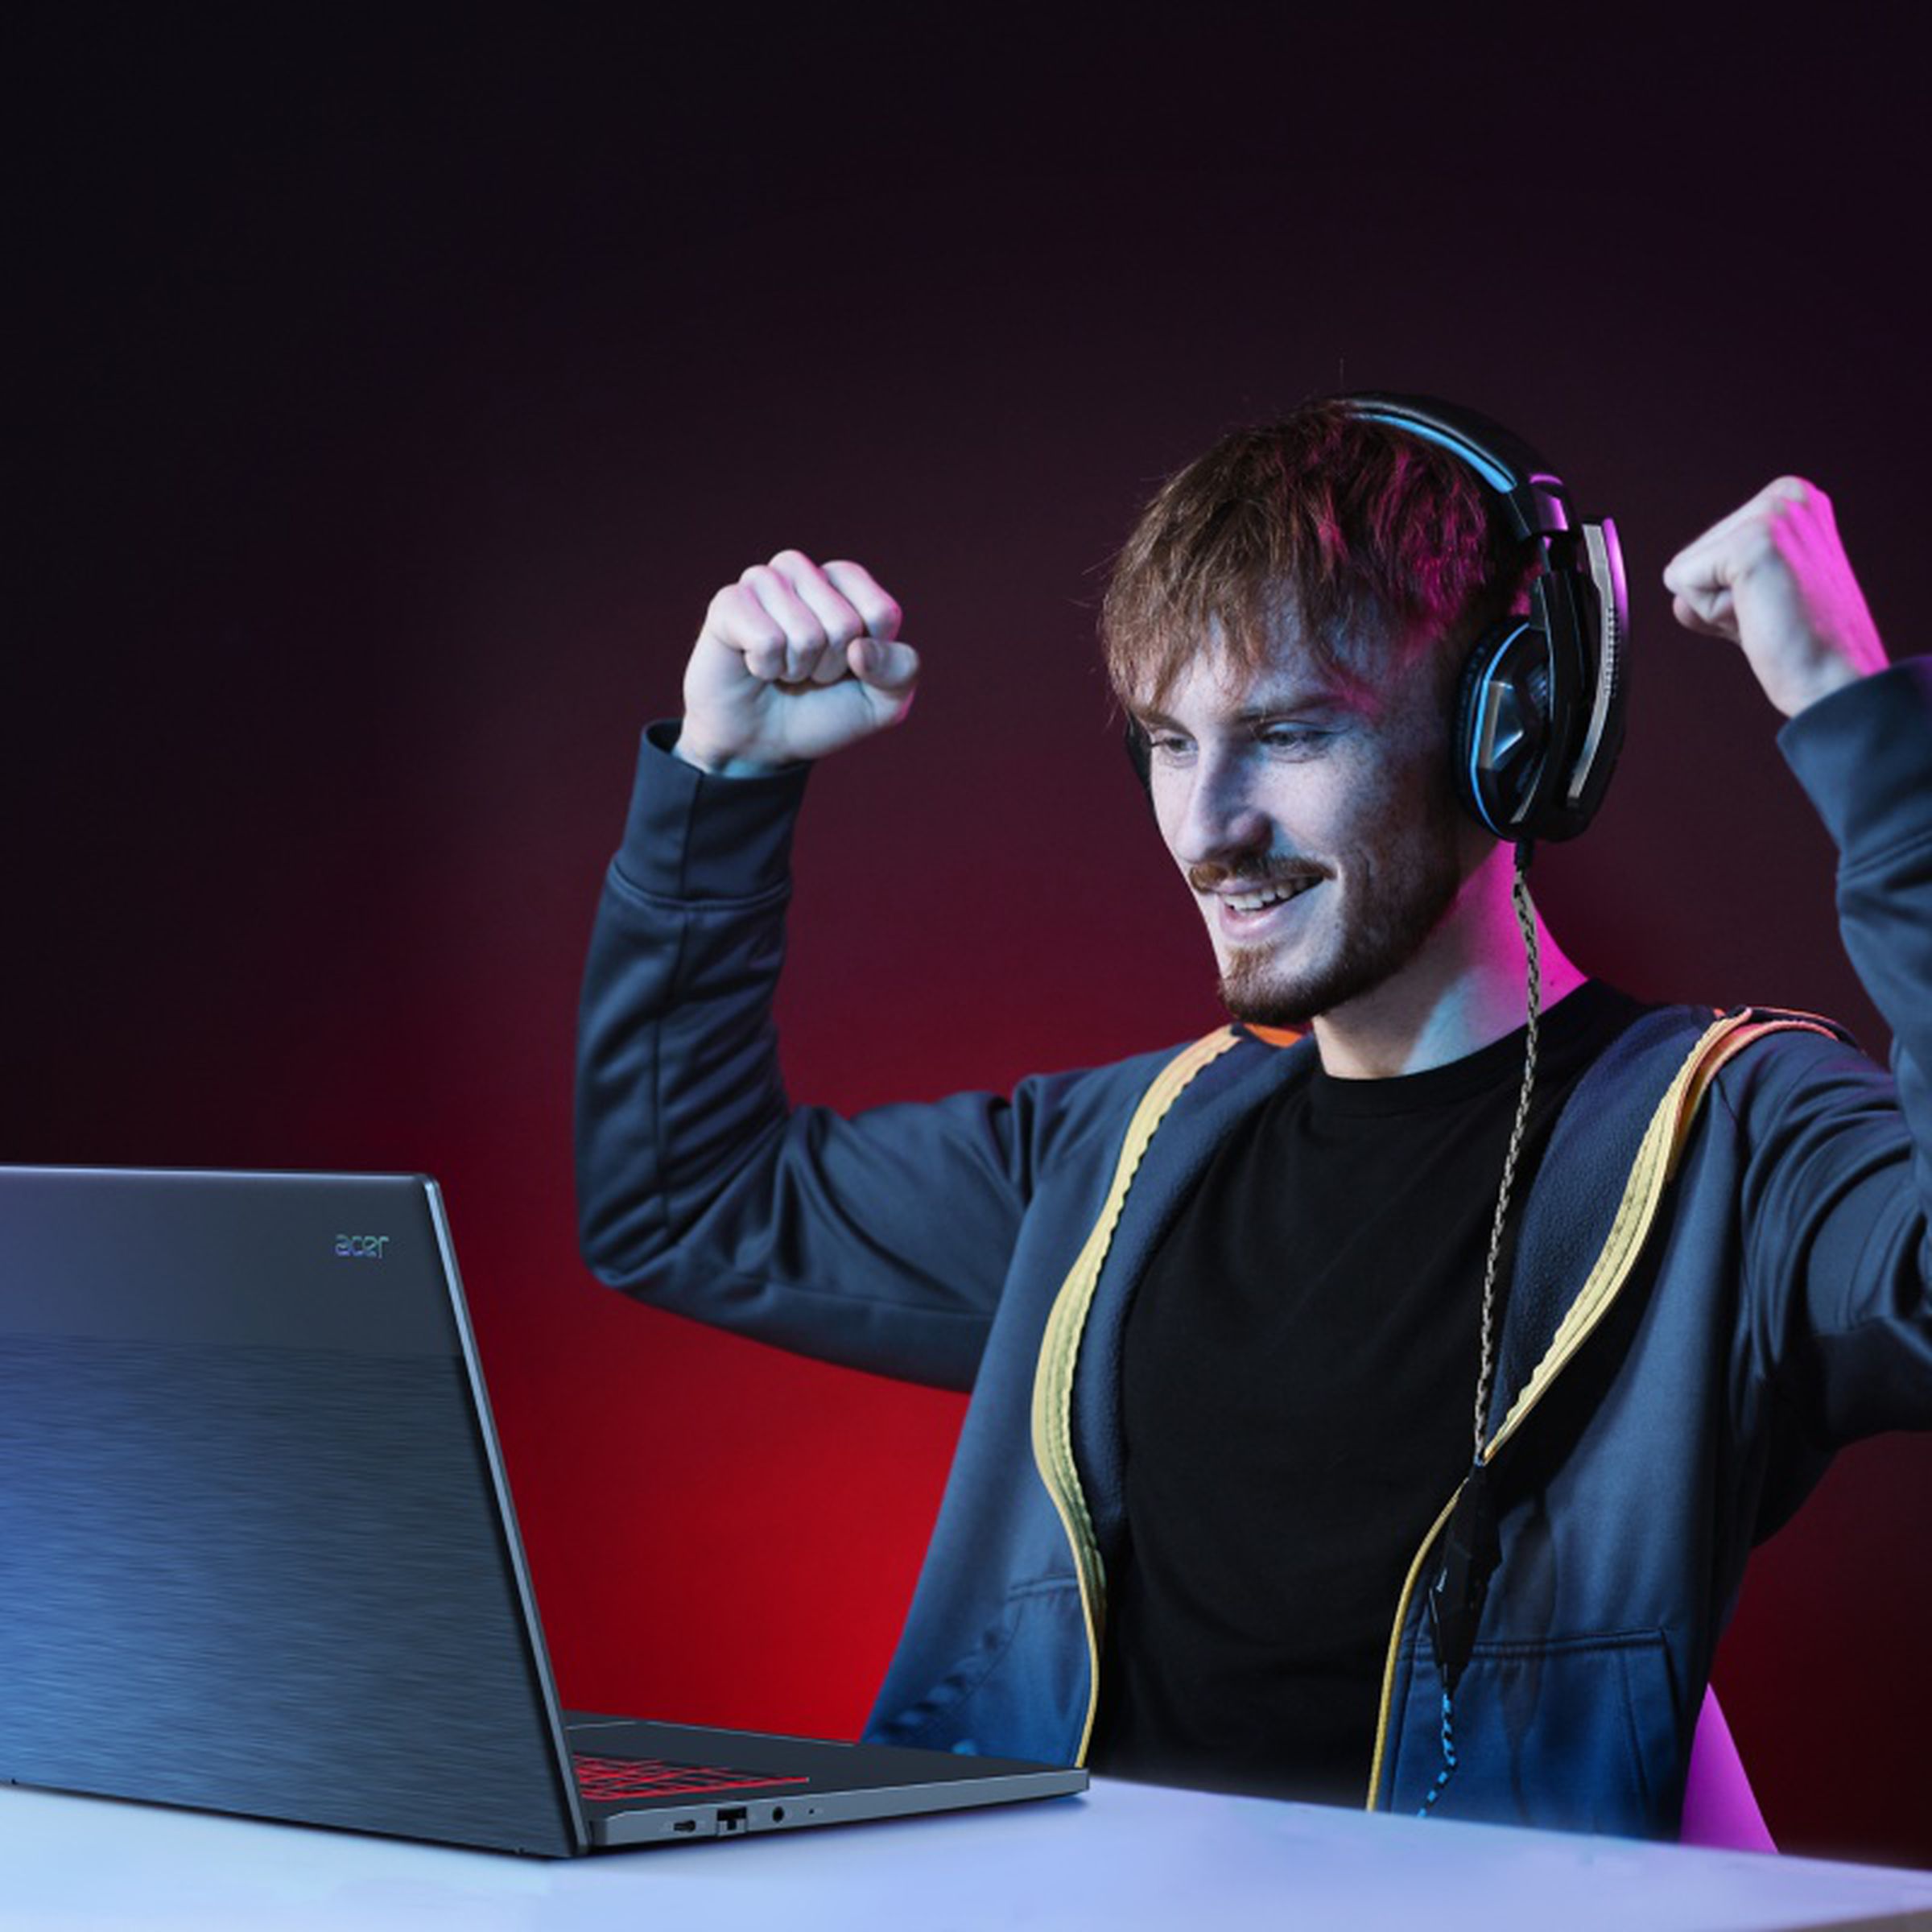 A user, wearing headphones, celebrates in front of an Acer gaming Chromebook in a dimly lit space.